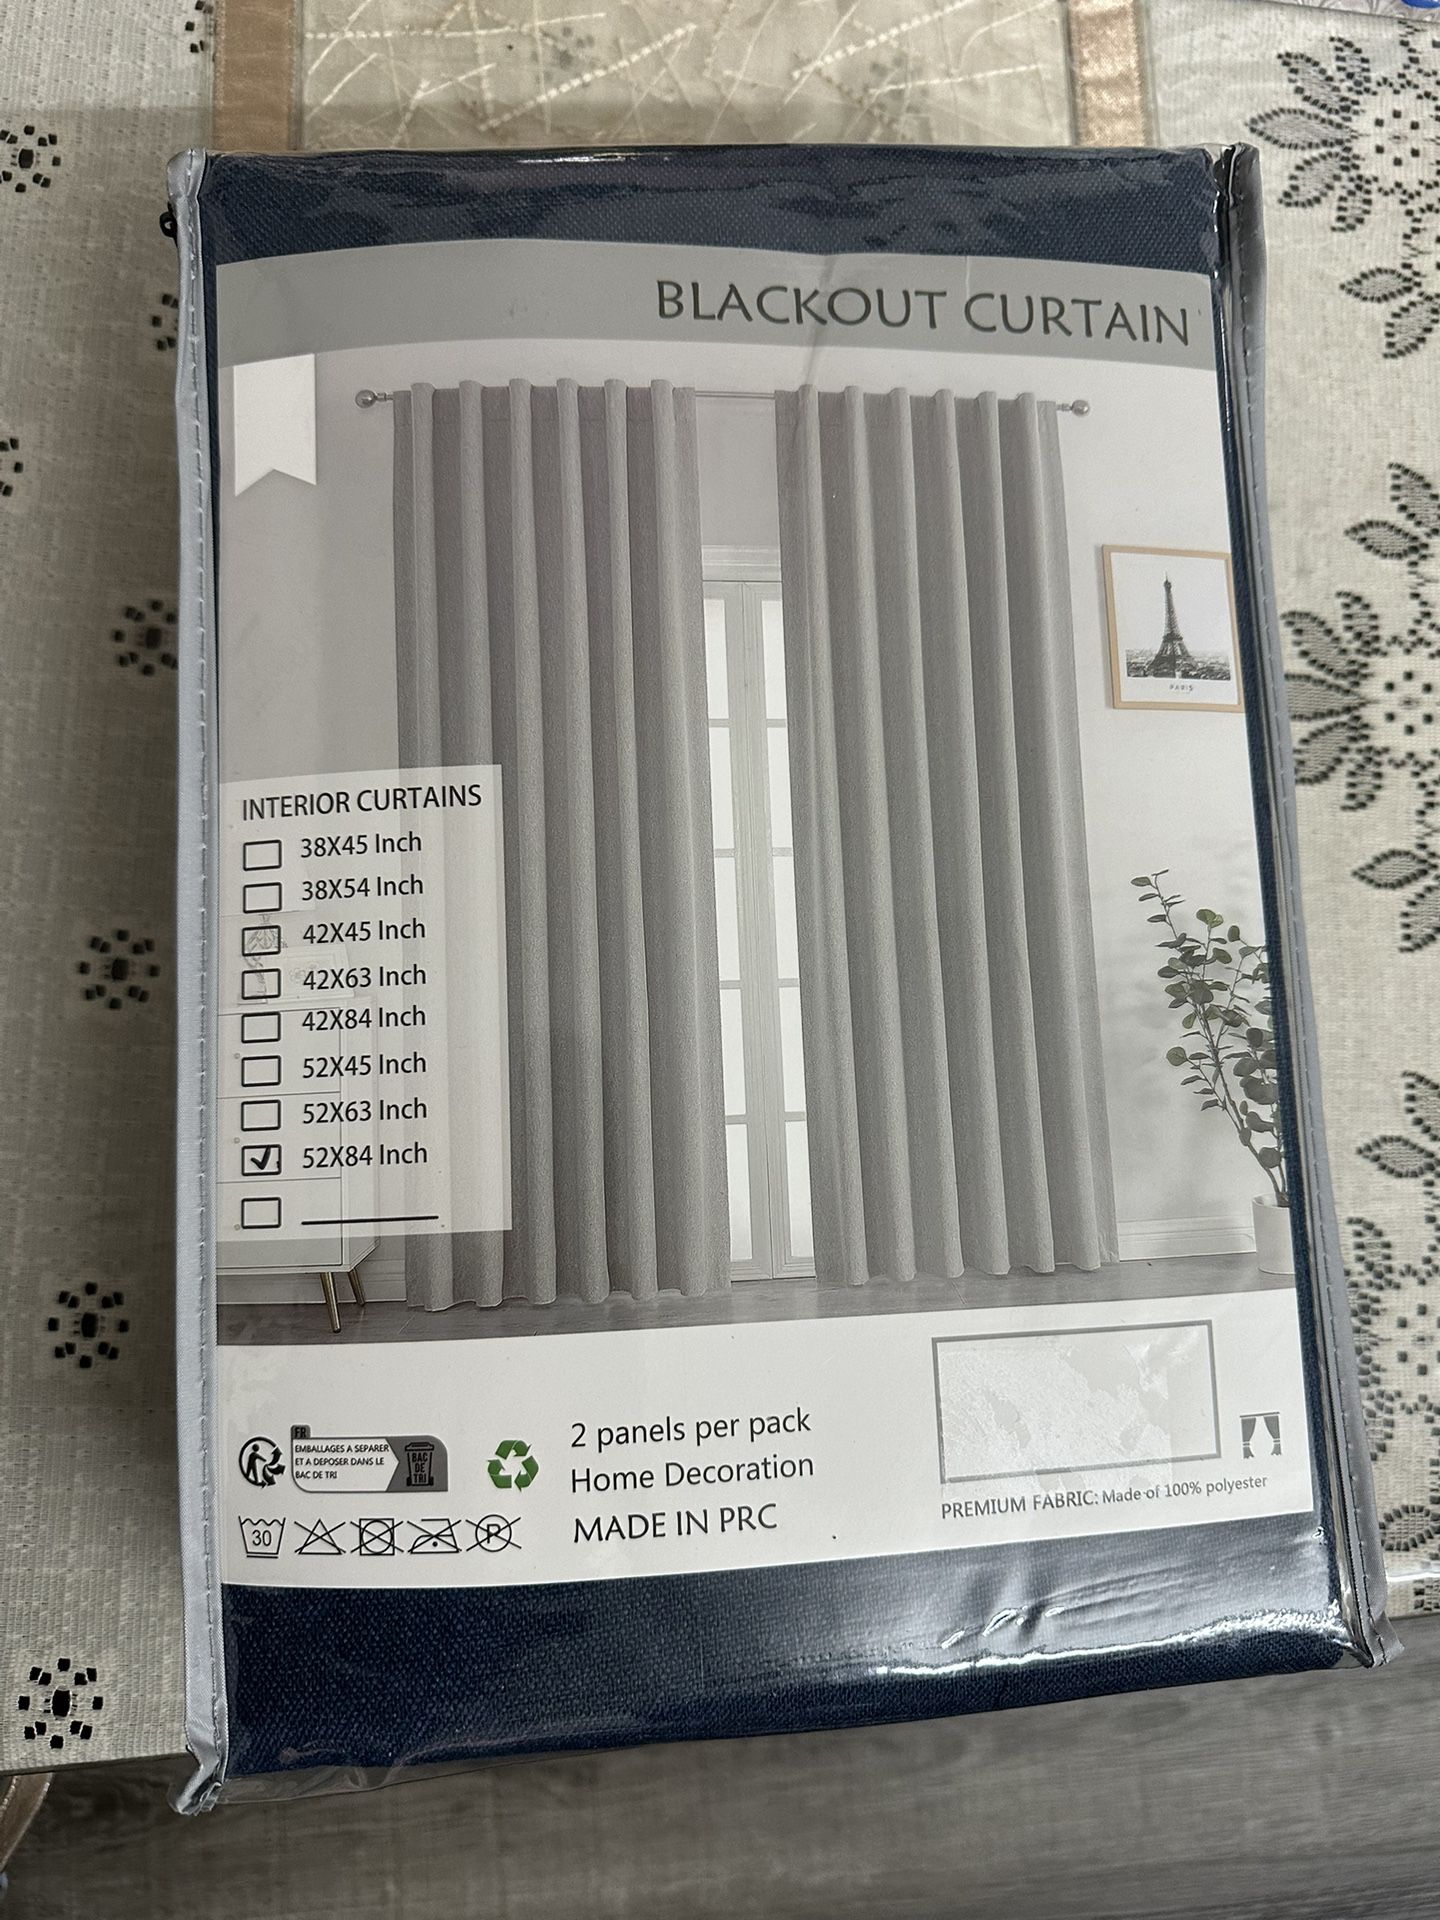 Linen 100% Blackout Curtains 84 inches Long,Back Tab & Rod Pocket Curtains,Thermal Insulated, Navy